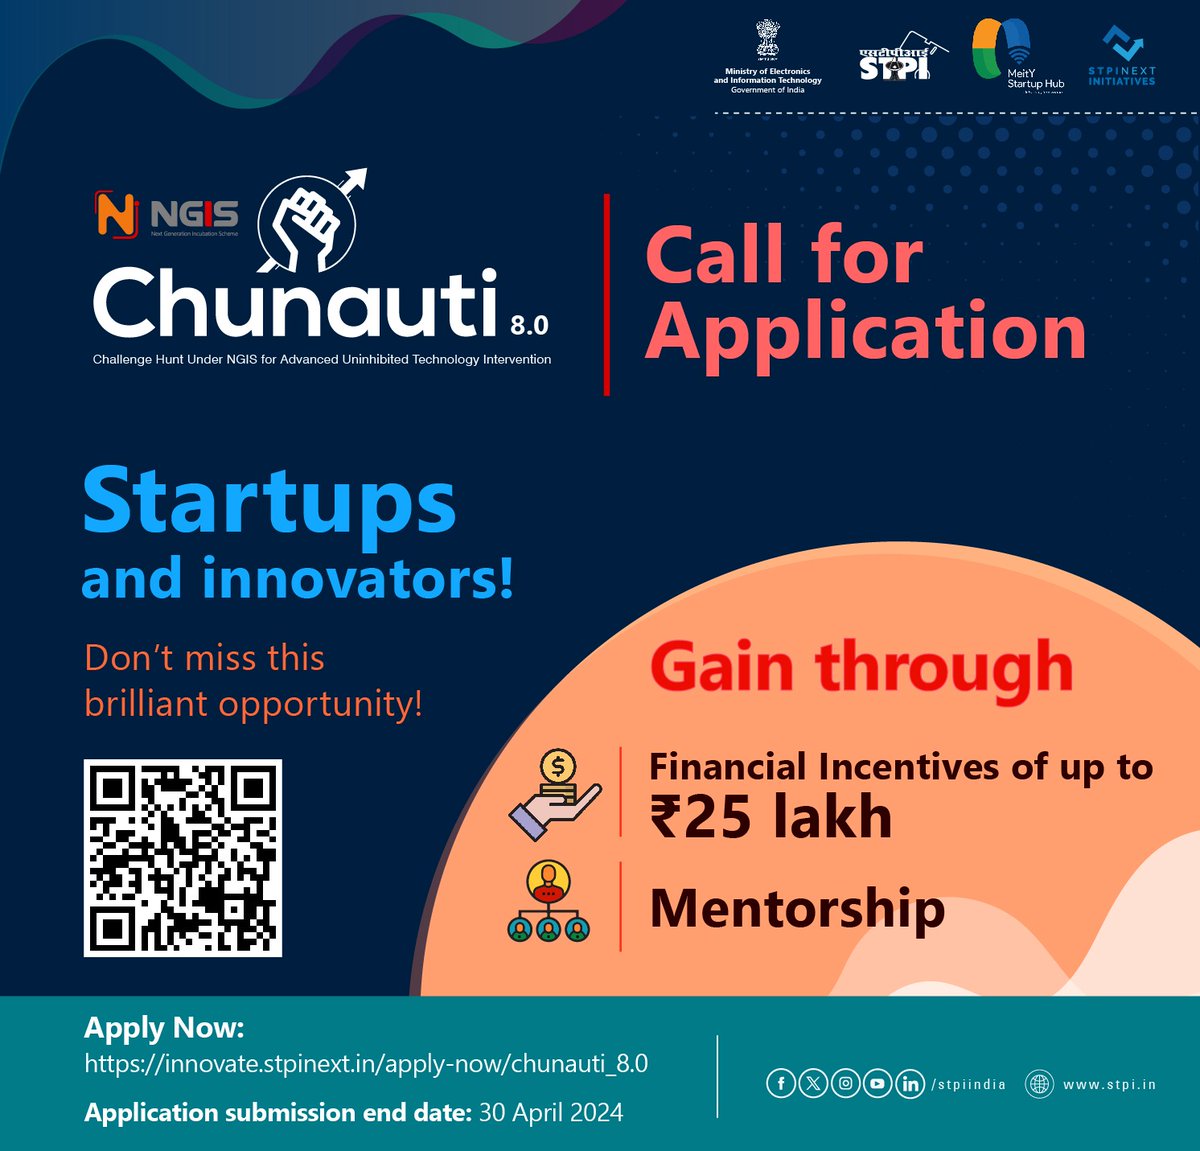 Calling all #Startups! & Innovators!🚀 Join the Startup revolution and be a part of #NGIS #CHUNAUTI 8.0 to grow your venture, achieve profitability, and make a global impact. Last day to Apply : 30 April 2024 Apply Now: innovate.stpinext.in/about-us/chuna…